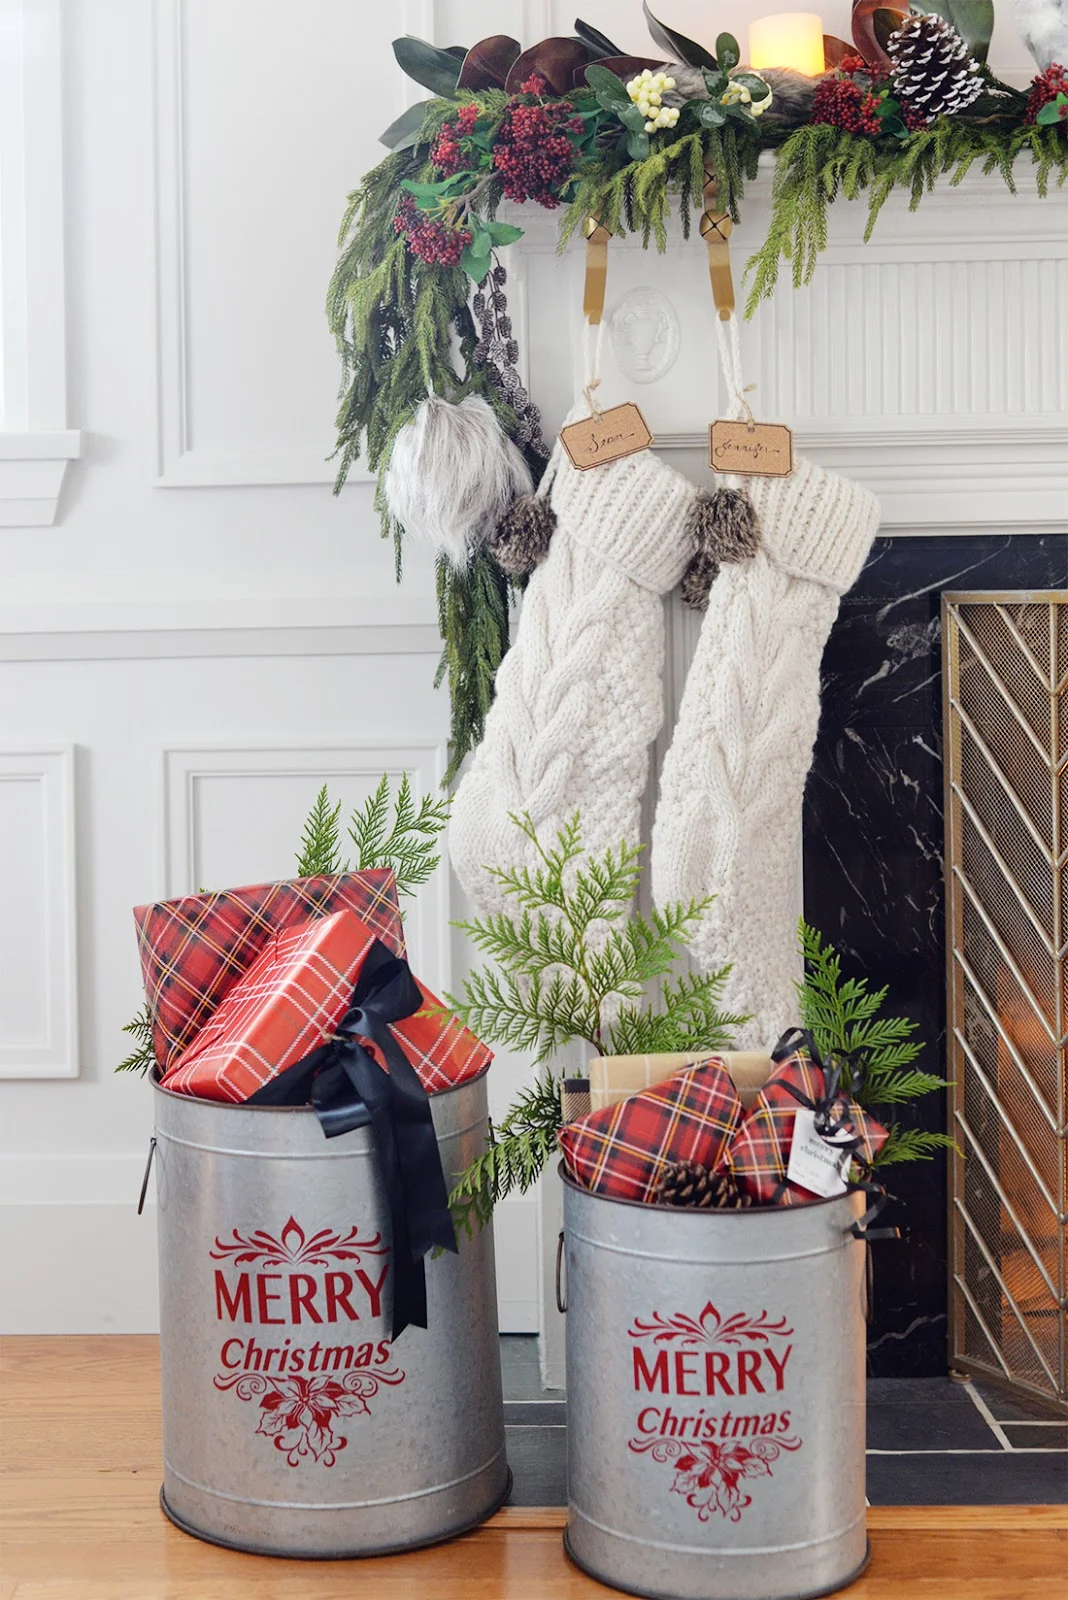 gifts in metal bucket, gifts displayed in galvanized bucket